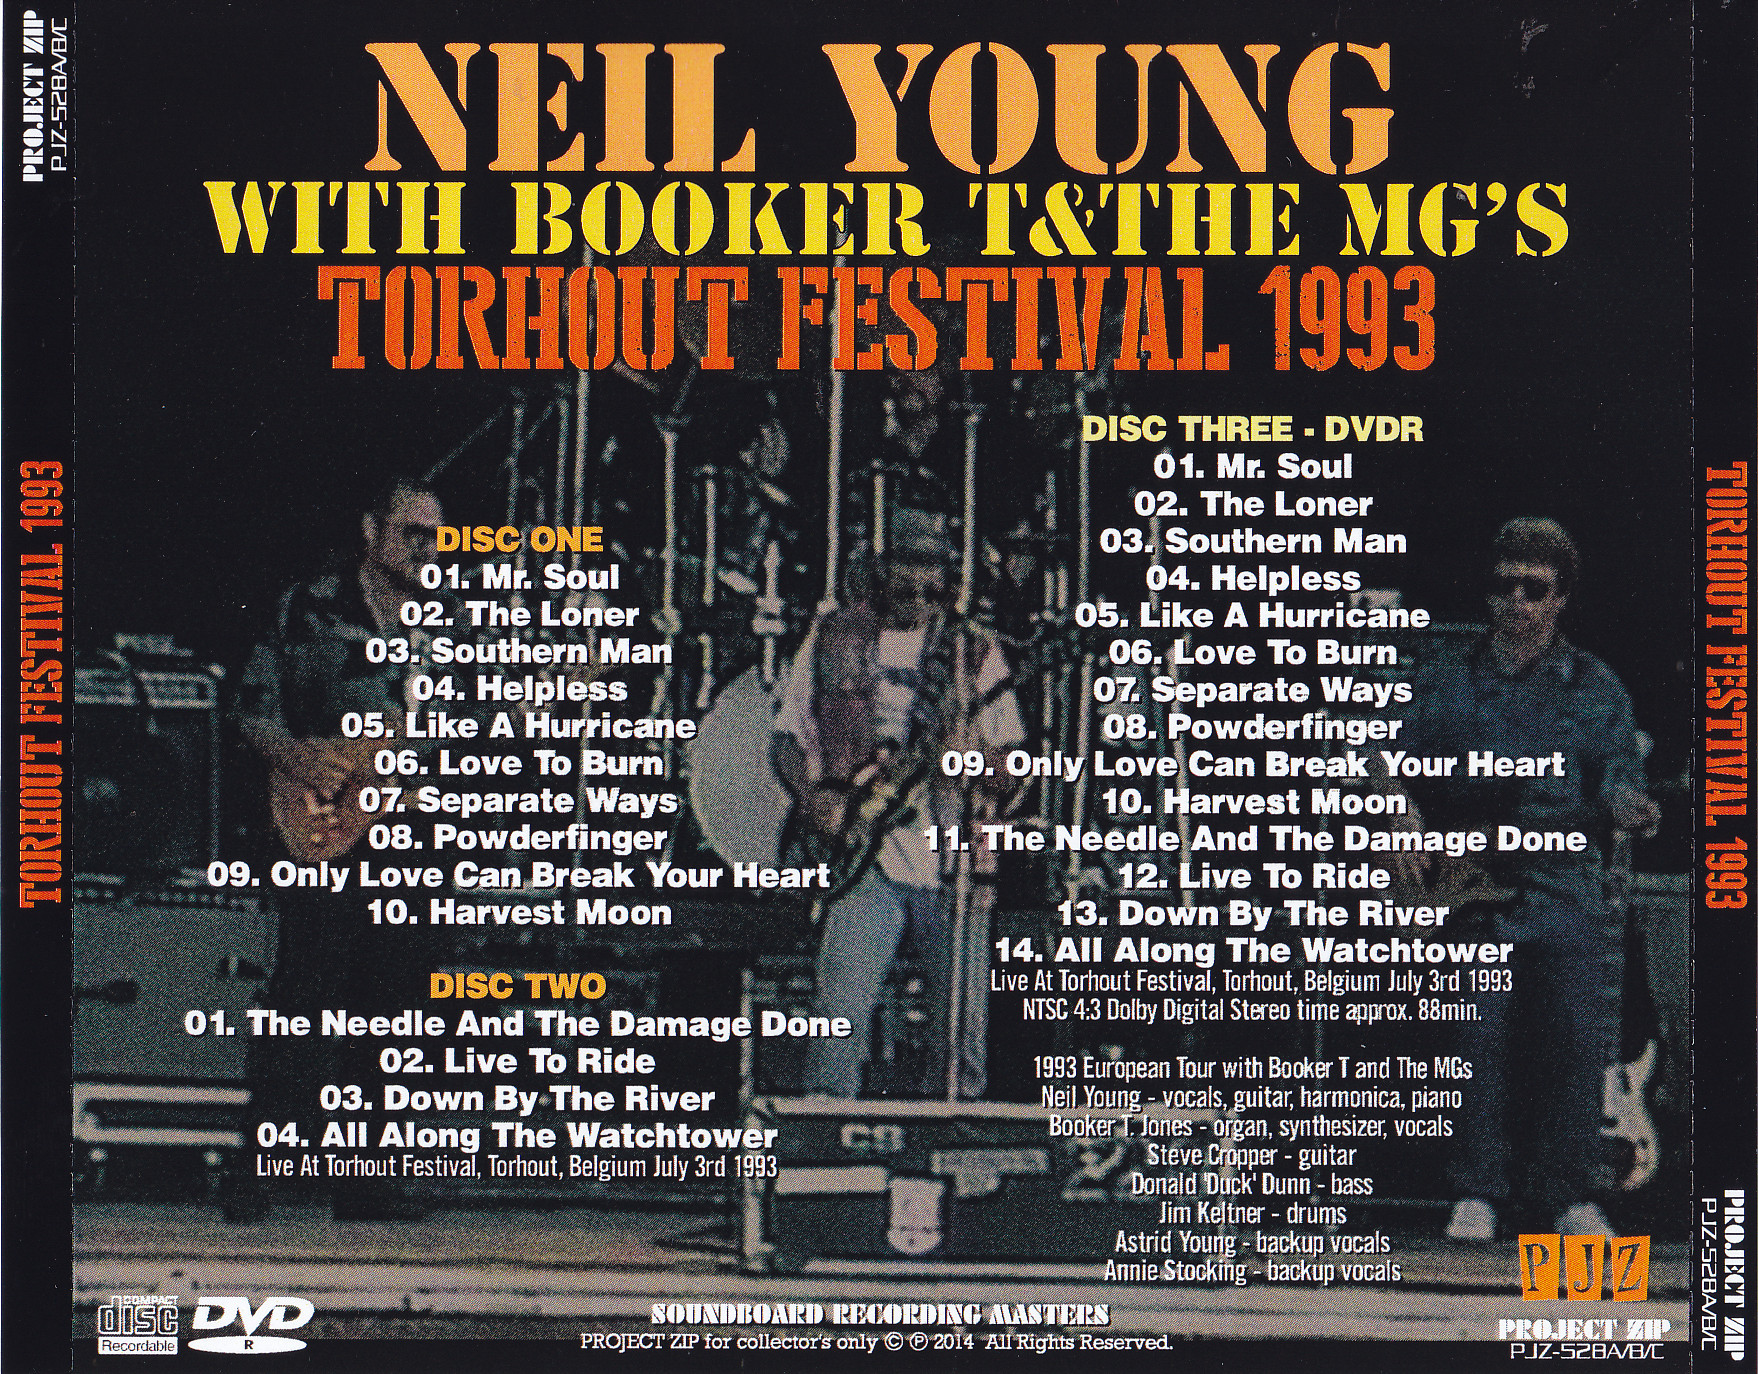 Neil Young With Booker T u0026 The MGS / Torhout Festival 1993 / 2CDR+1DVDR –  GiGinJapan